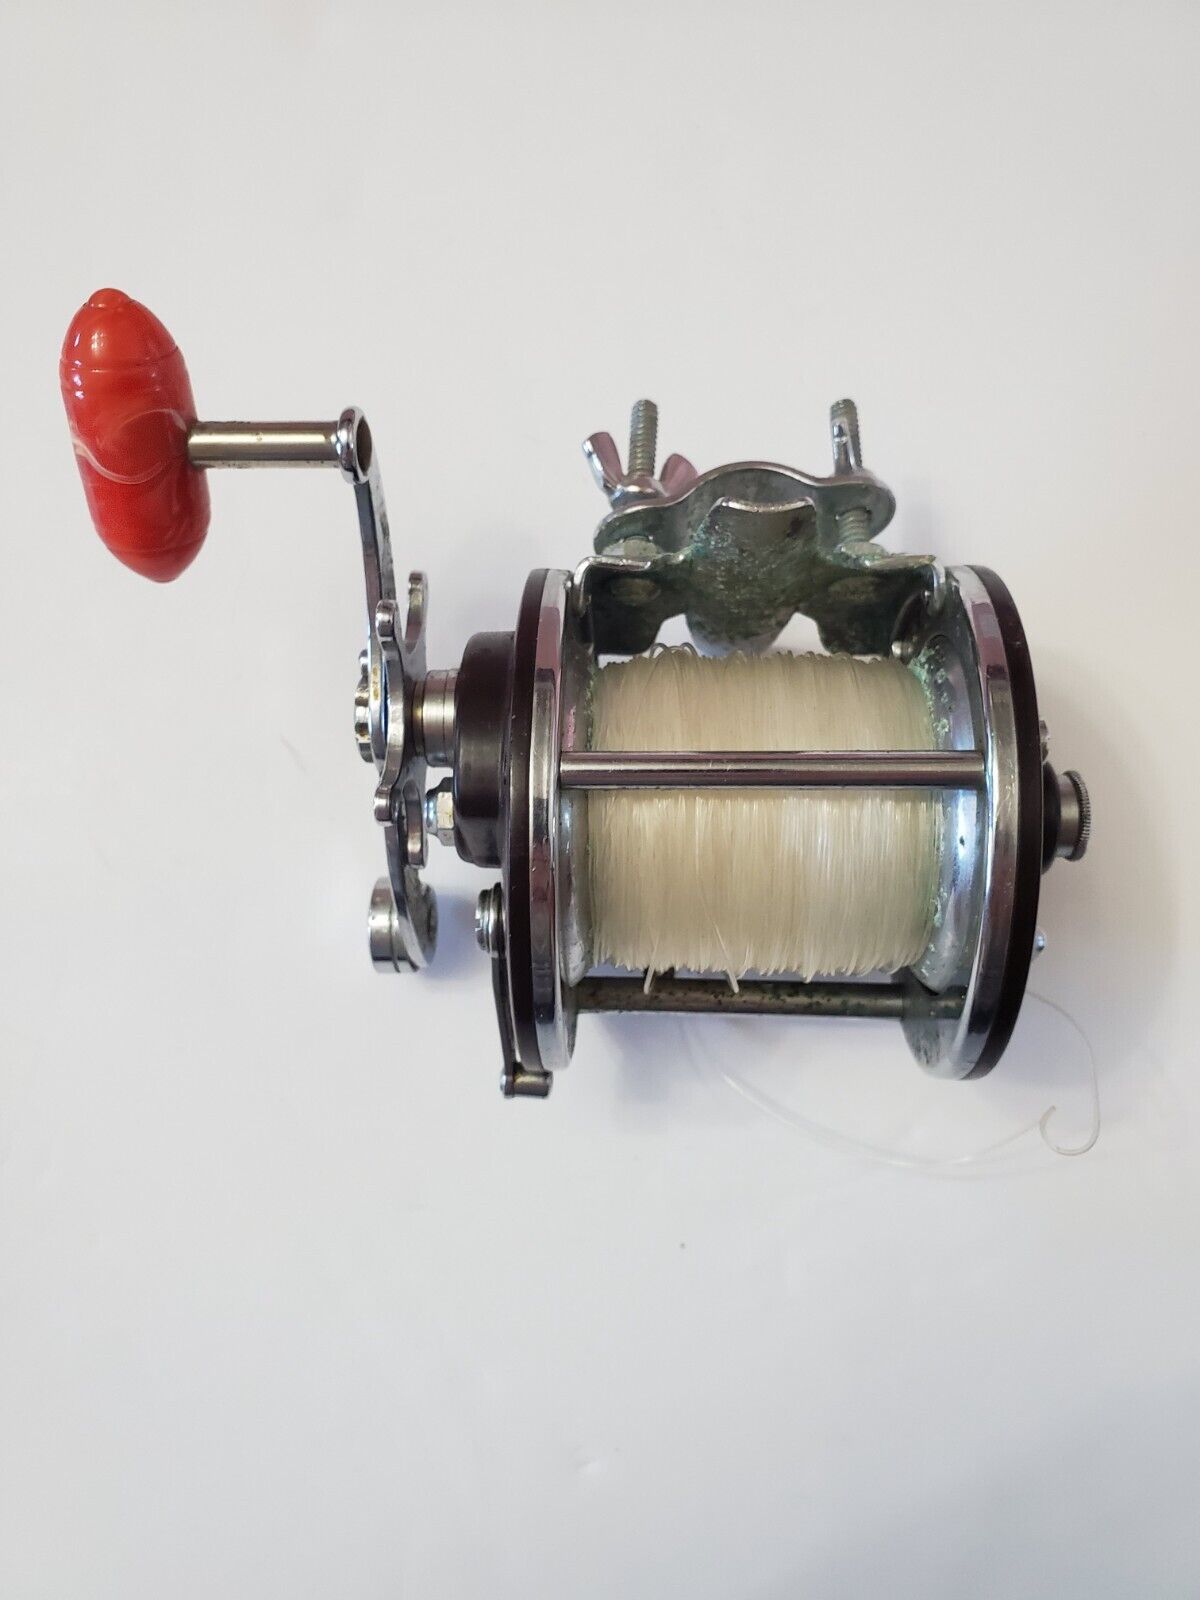 Penn Peer 209 Fishing Reel With Line Red and 46 similar items